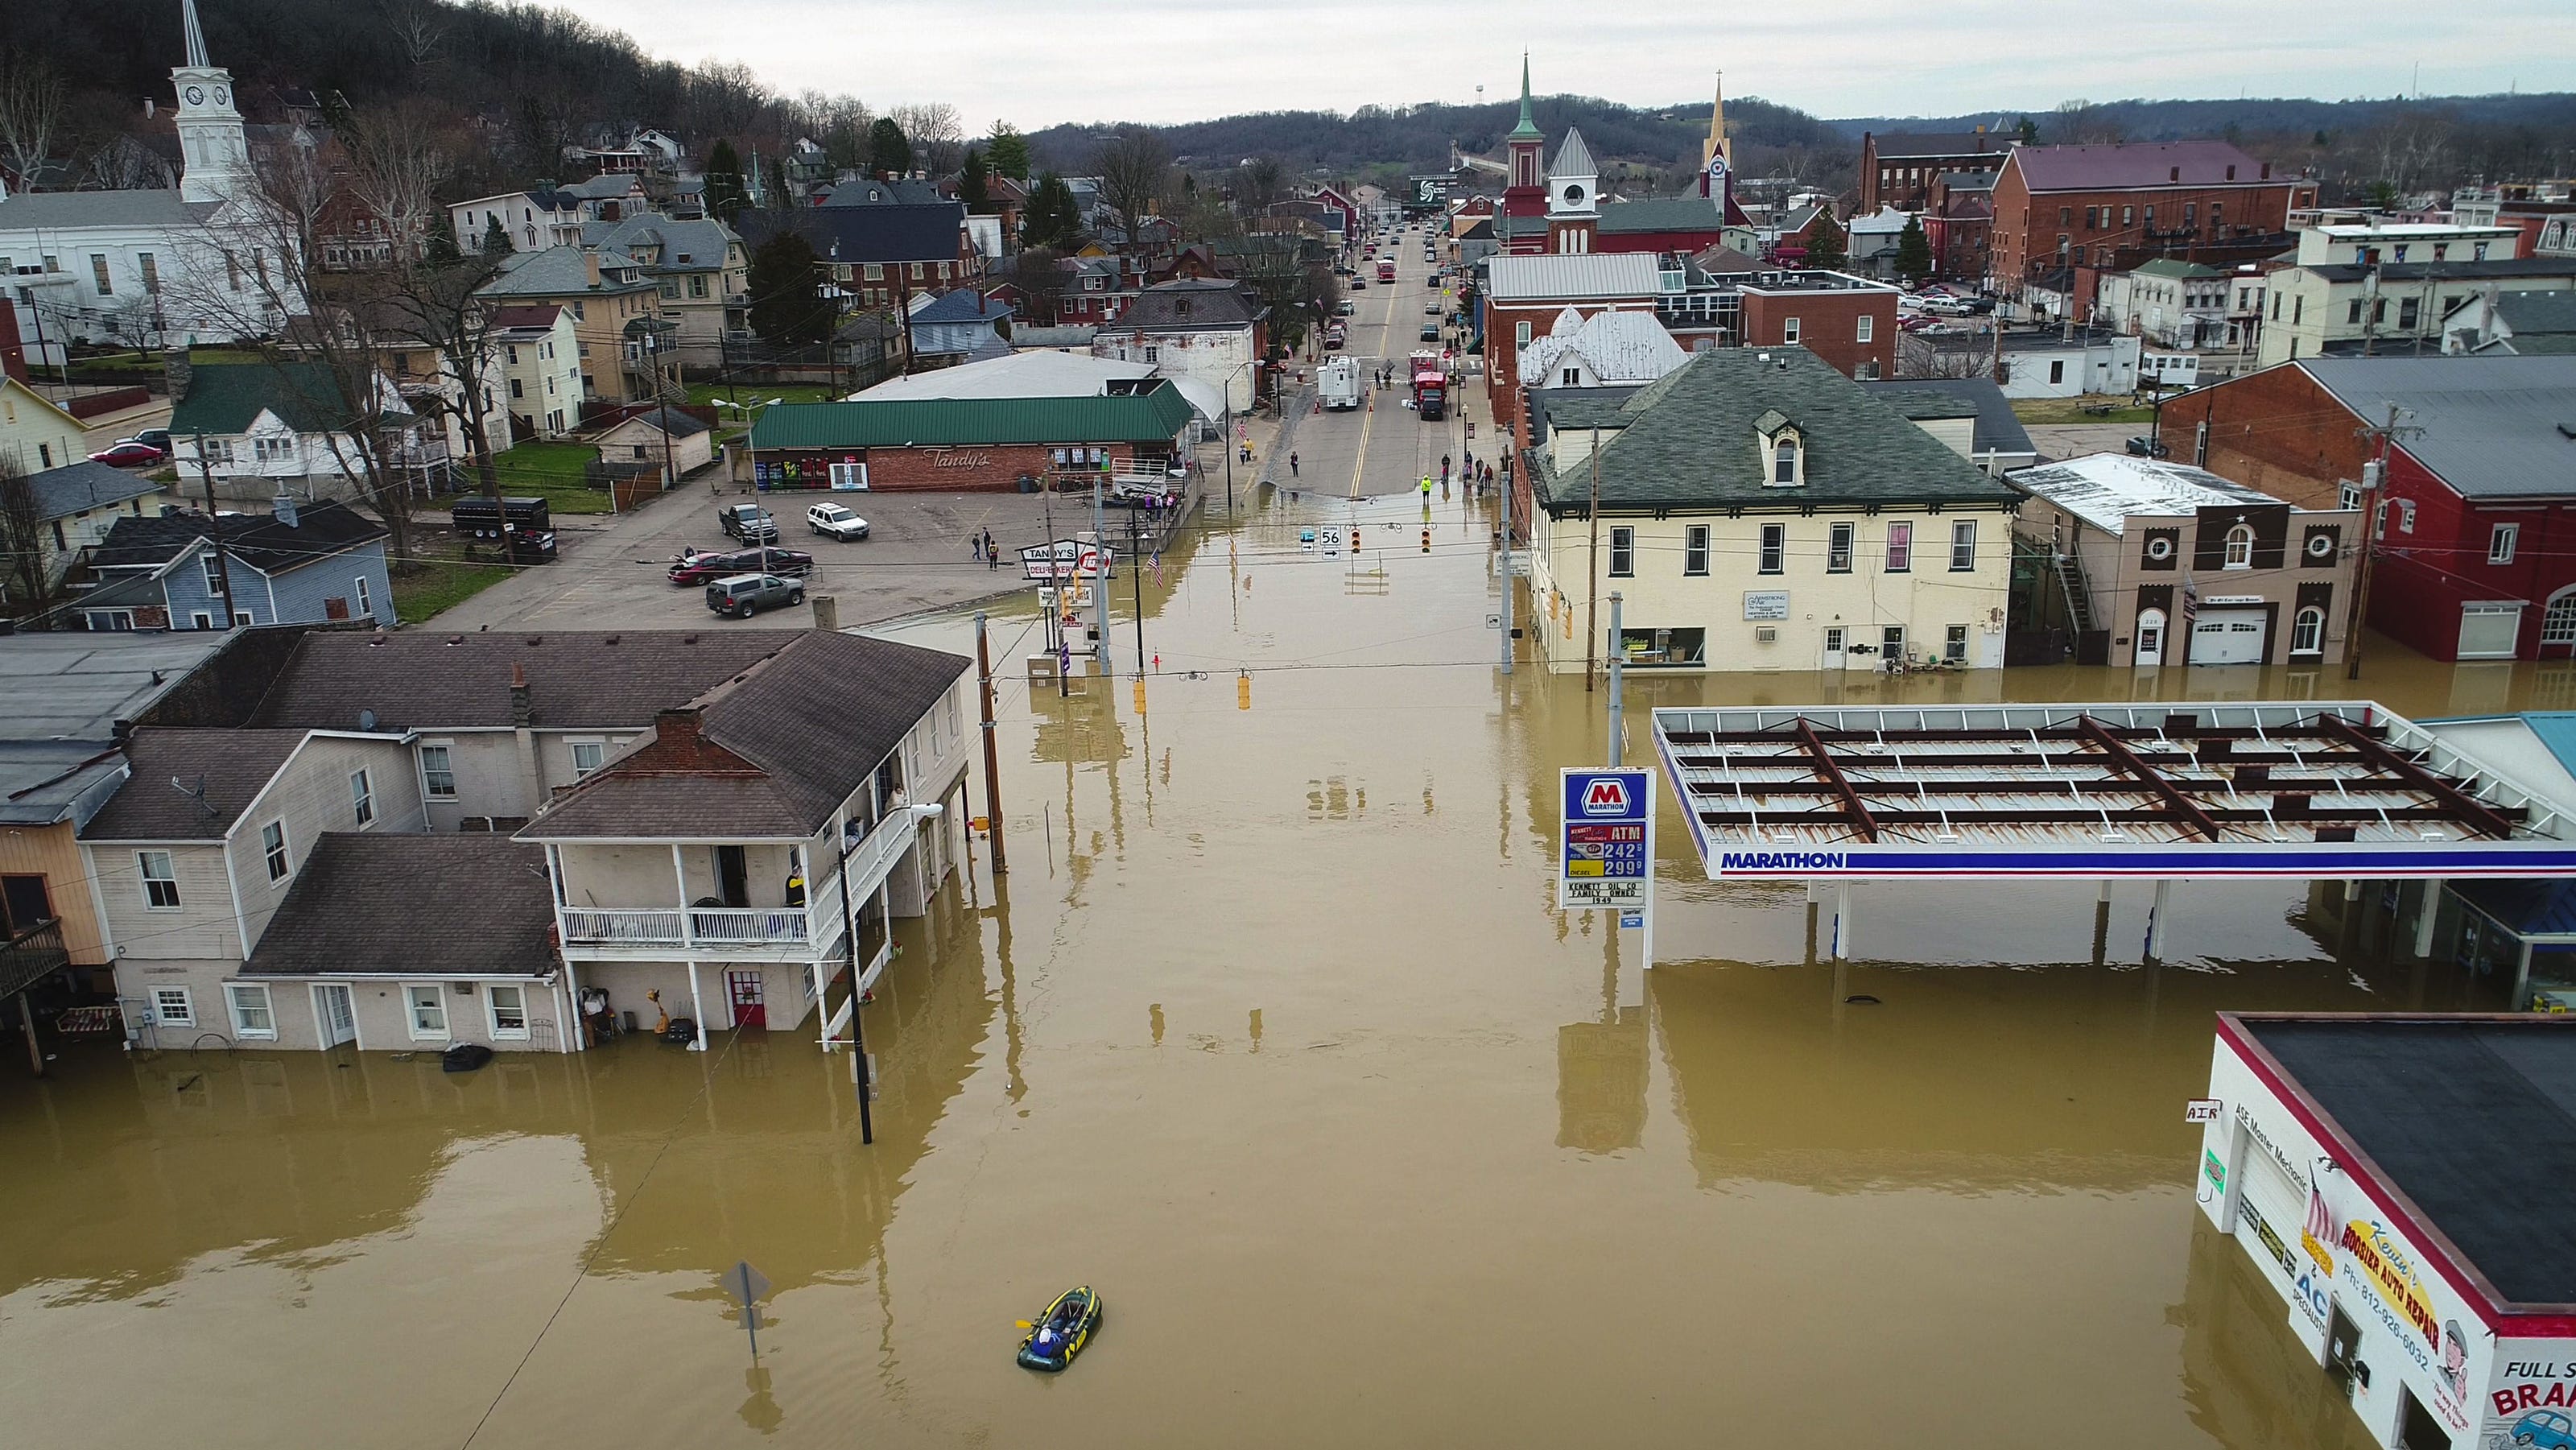 113,000 more homes at risk of flooding in Indiana, a report says